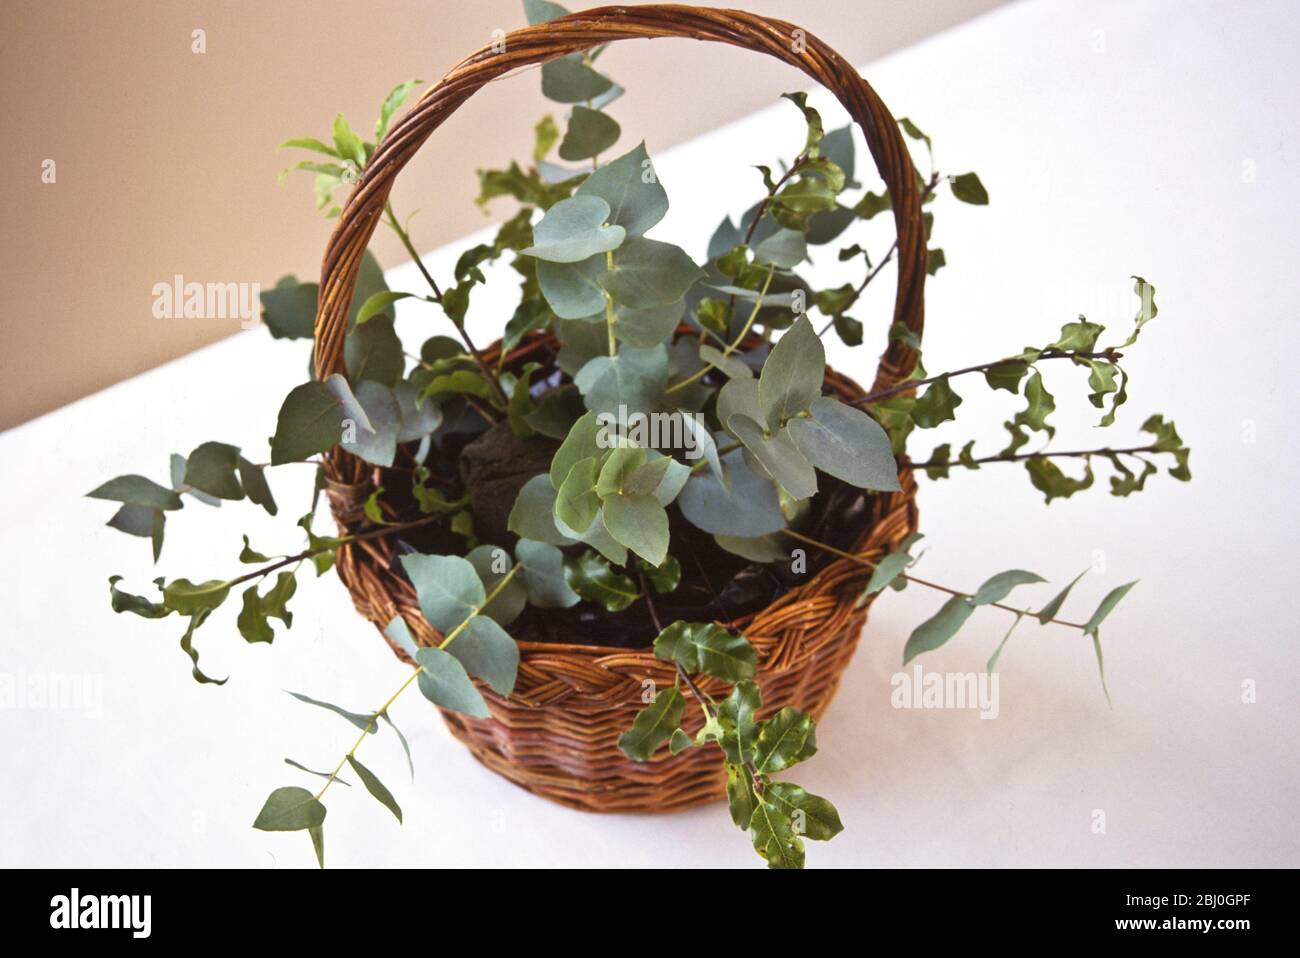 Foundation of flower arrangement - eucalyptus and greenery gsprigs in oasis in handled basket - Stock Photo